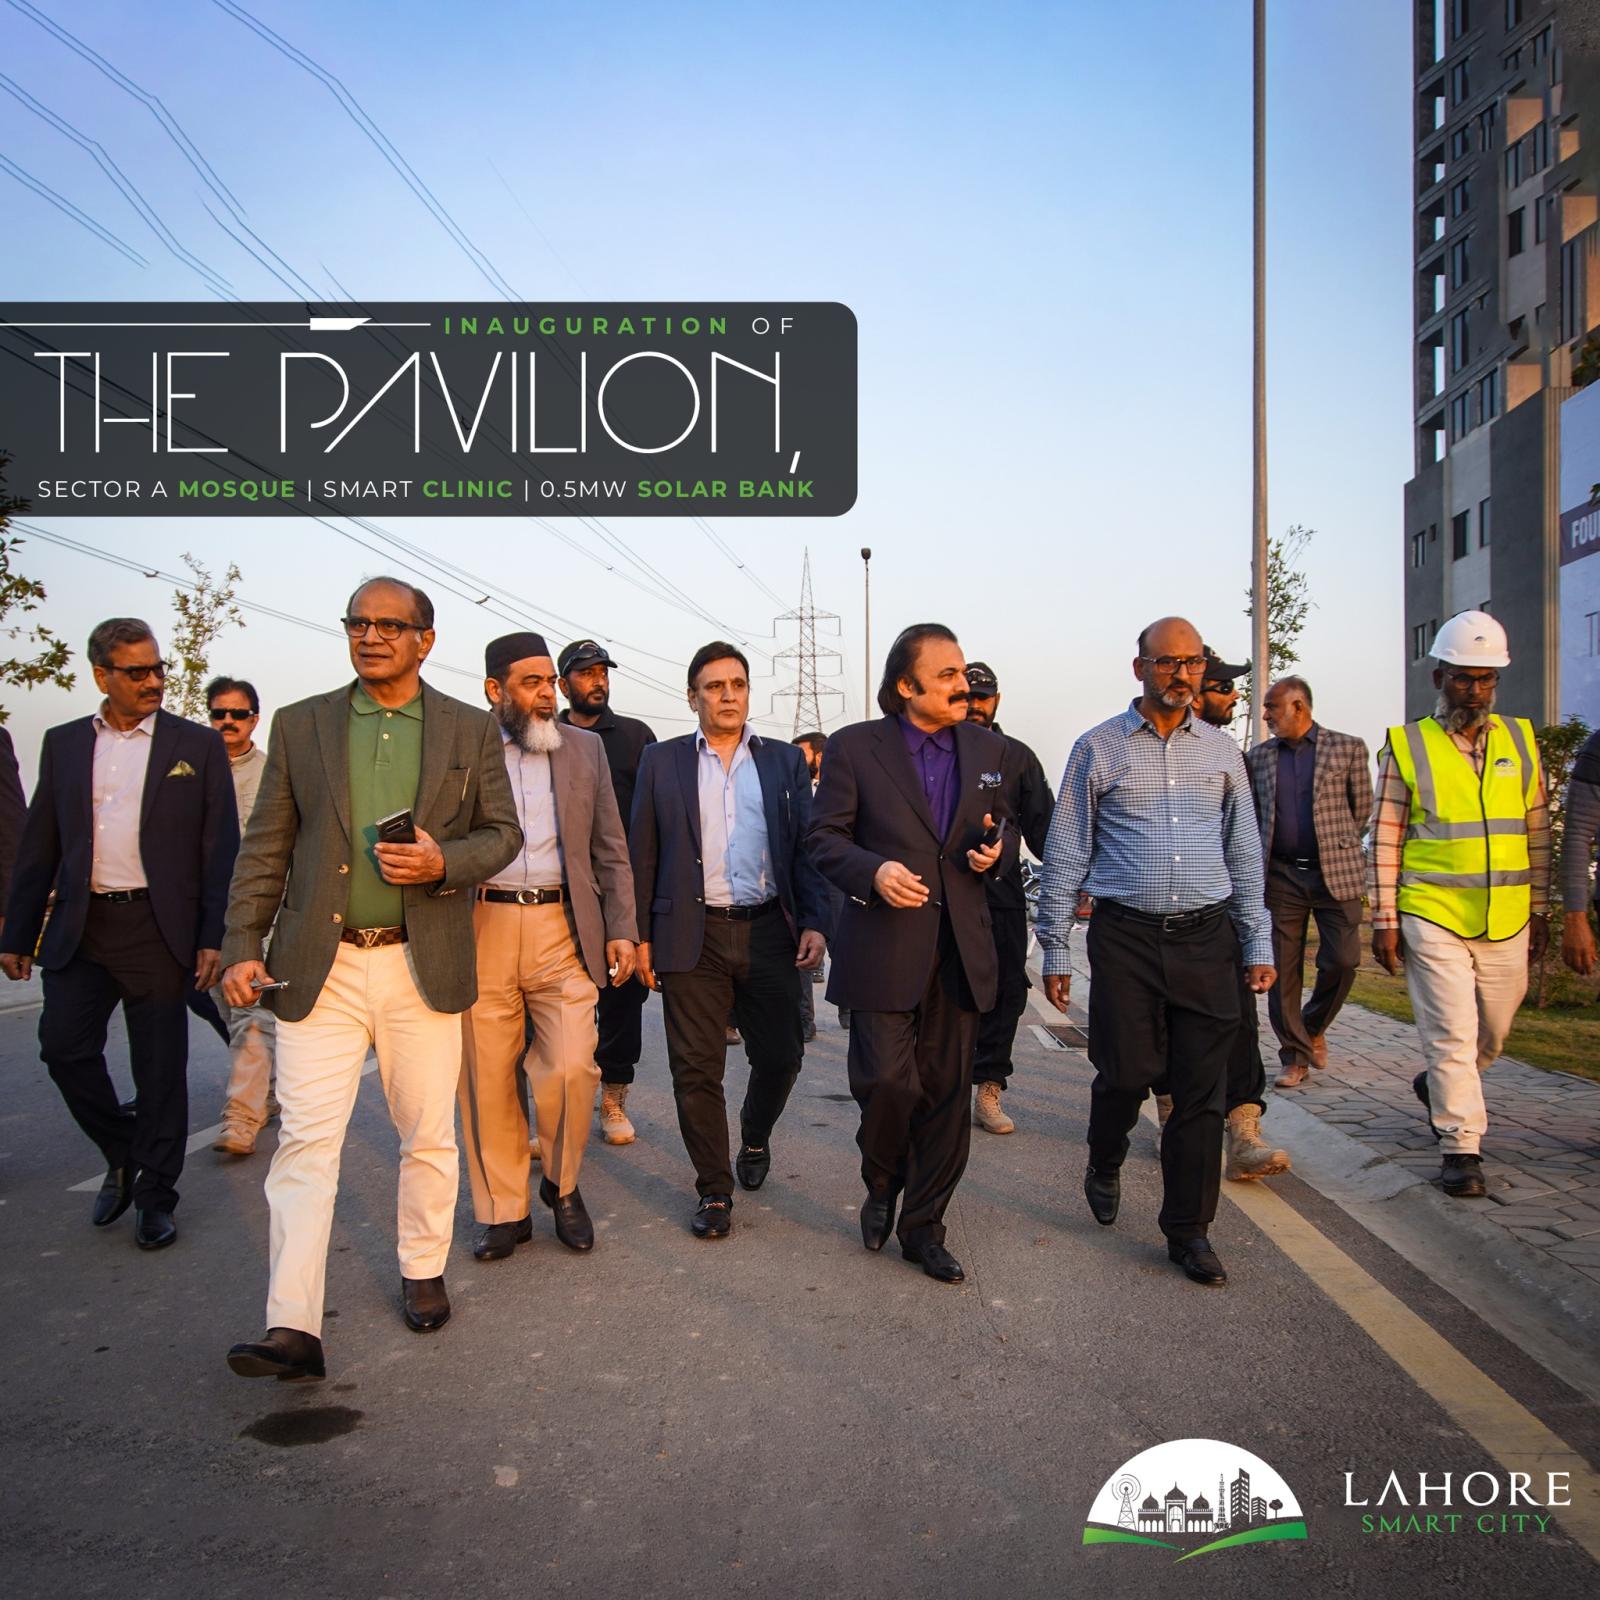 Inauguration of The Pavilion Sector A Mosque | Smart Clinic | 0.5MW Solar Bank